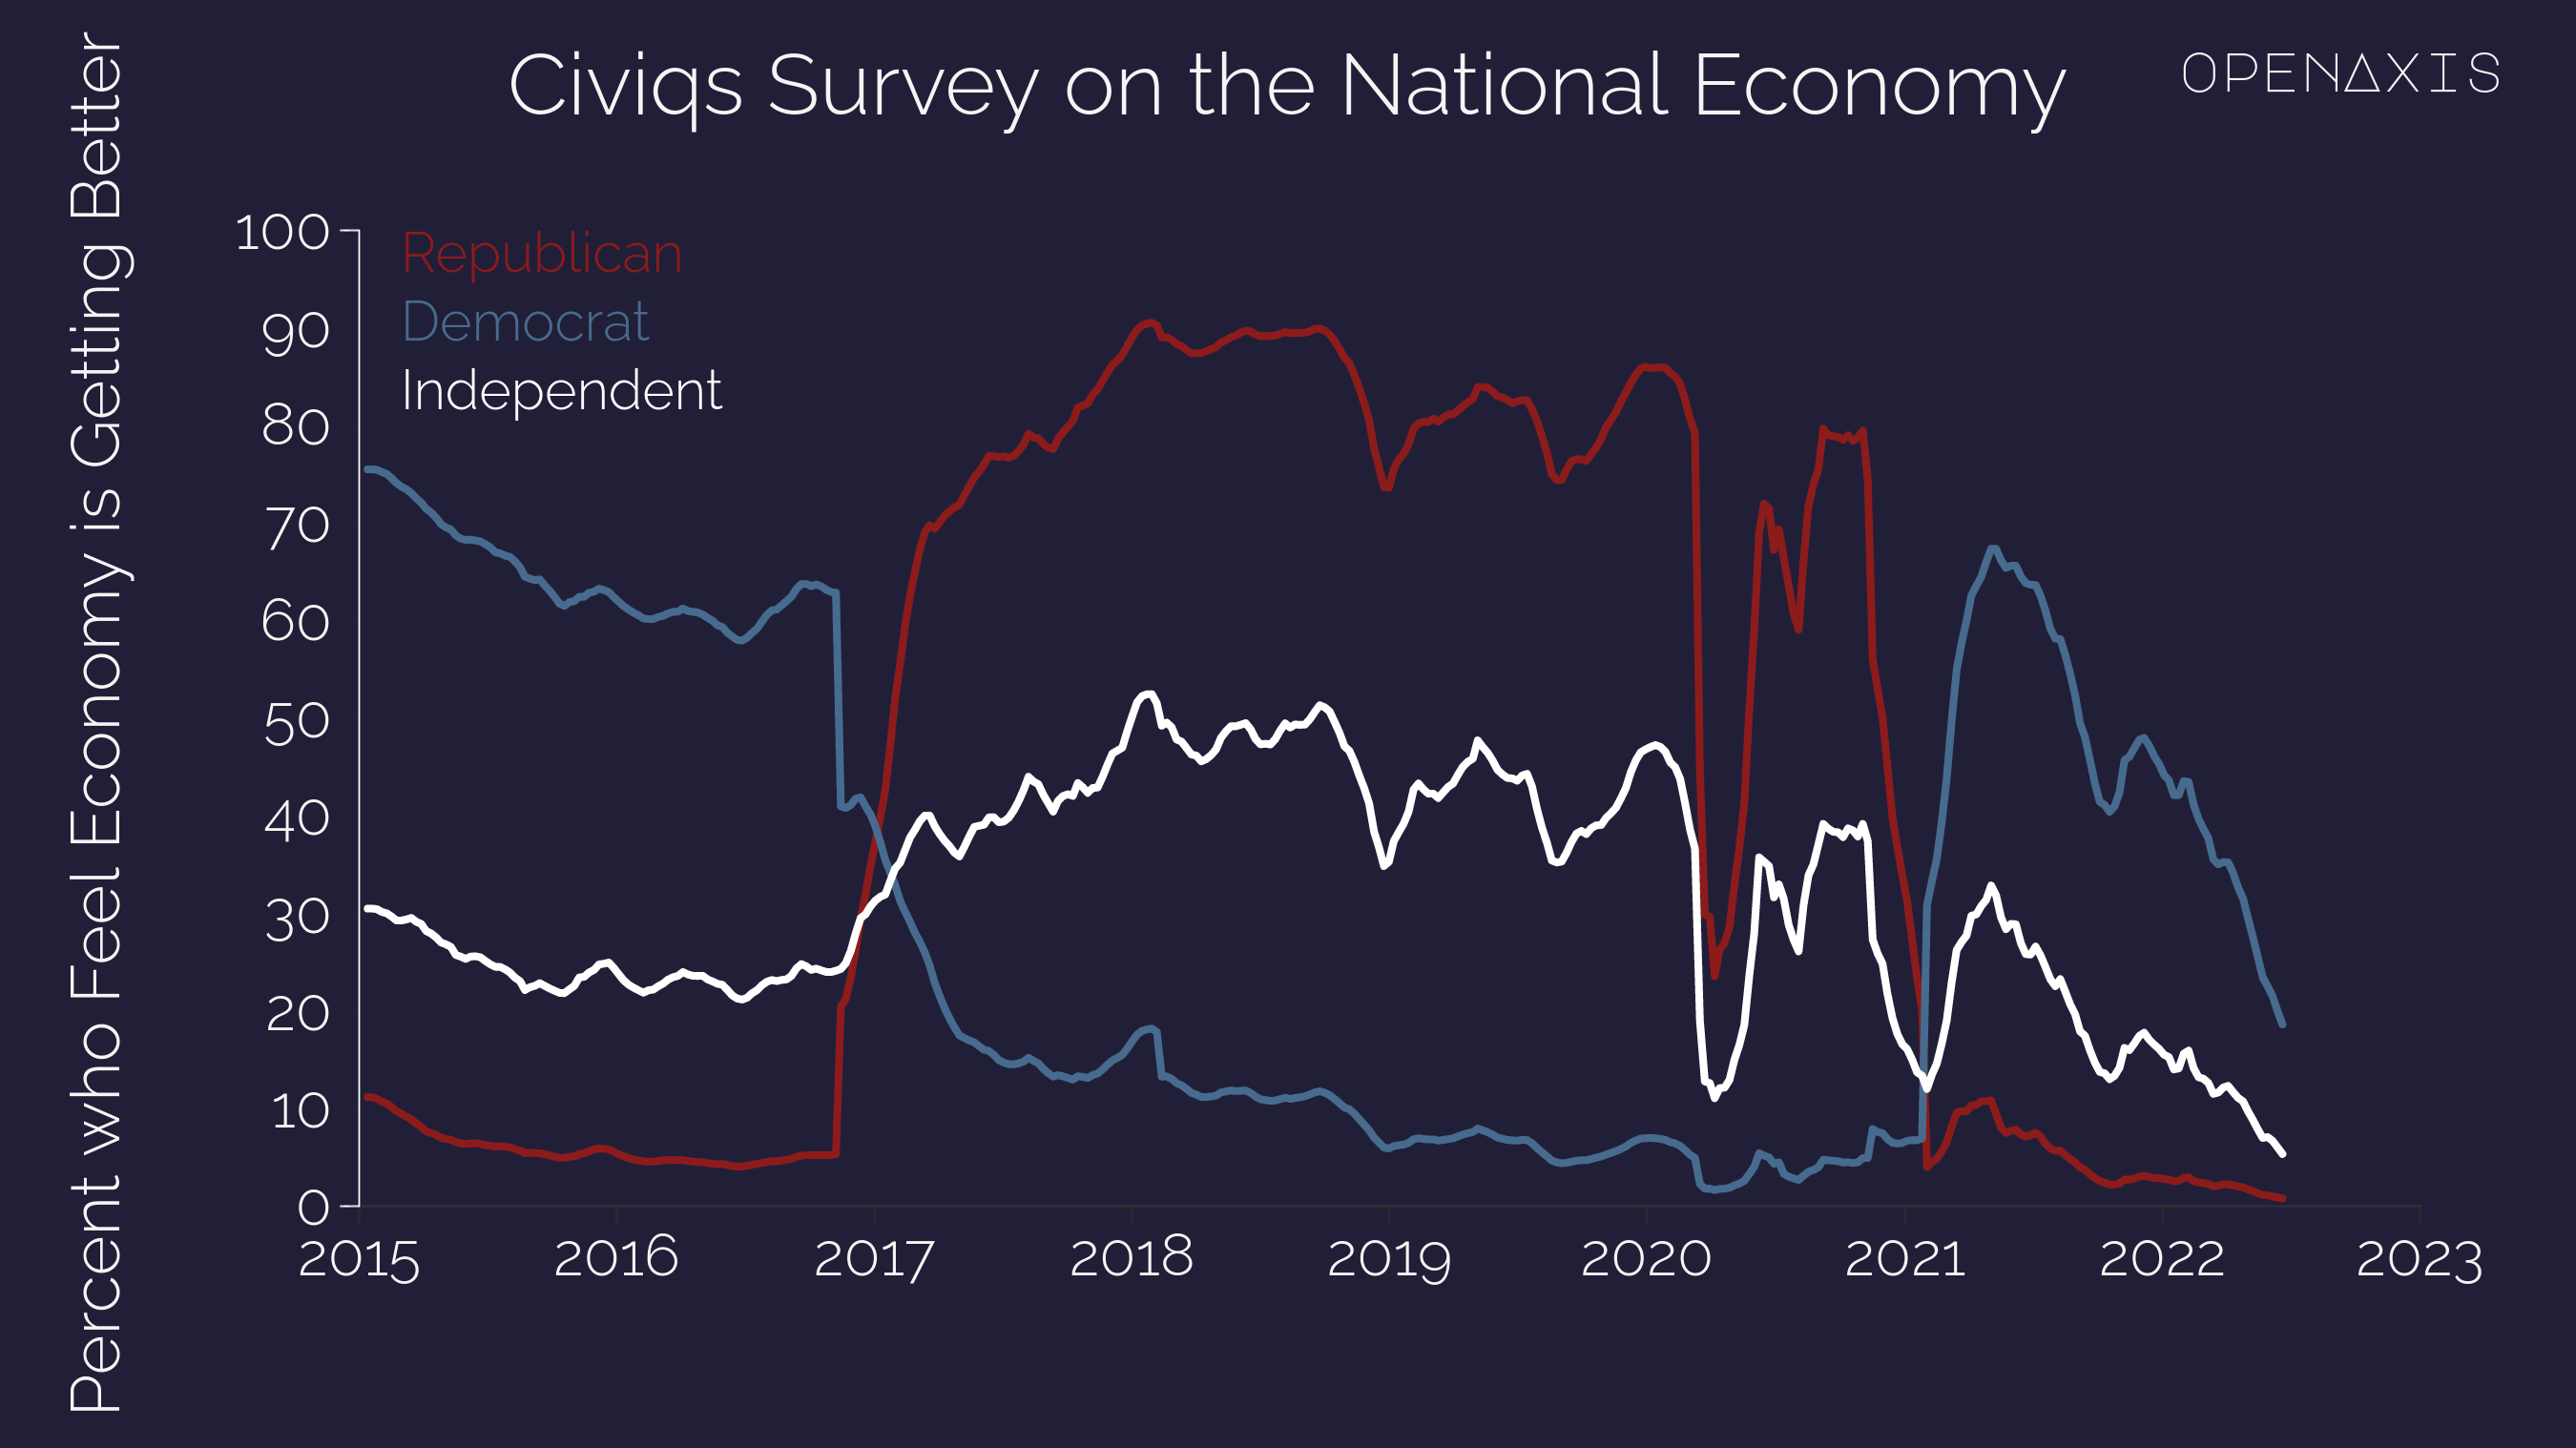 <p>How people feel about the direction on economy appears relatively partisan - with democrats tending to feel it is "Getting Better" more than republicans until the Obama-Trump transition, only to feel like it is "Getting Better" more than republicans again once again shortly after the Biden inauguration.</p><p><br /></p><p>Source: <a href="https://app.openaxis.com/data/3880" target="_blank">Civiqs</a></p>